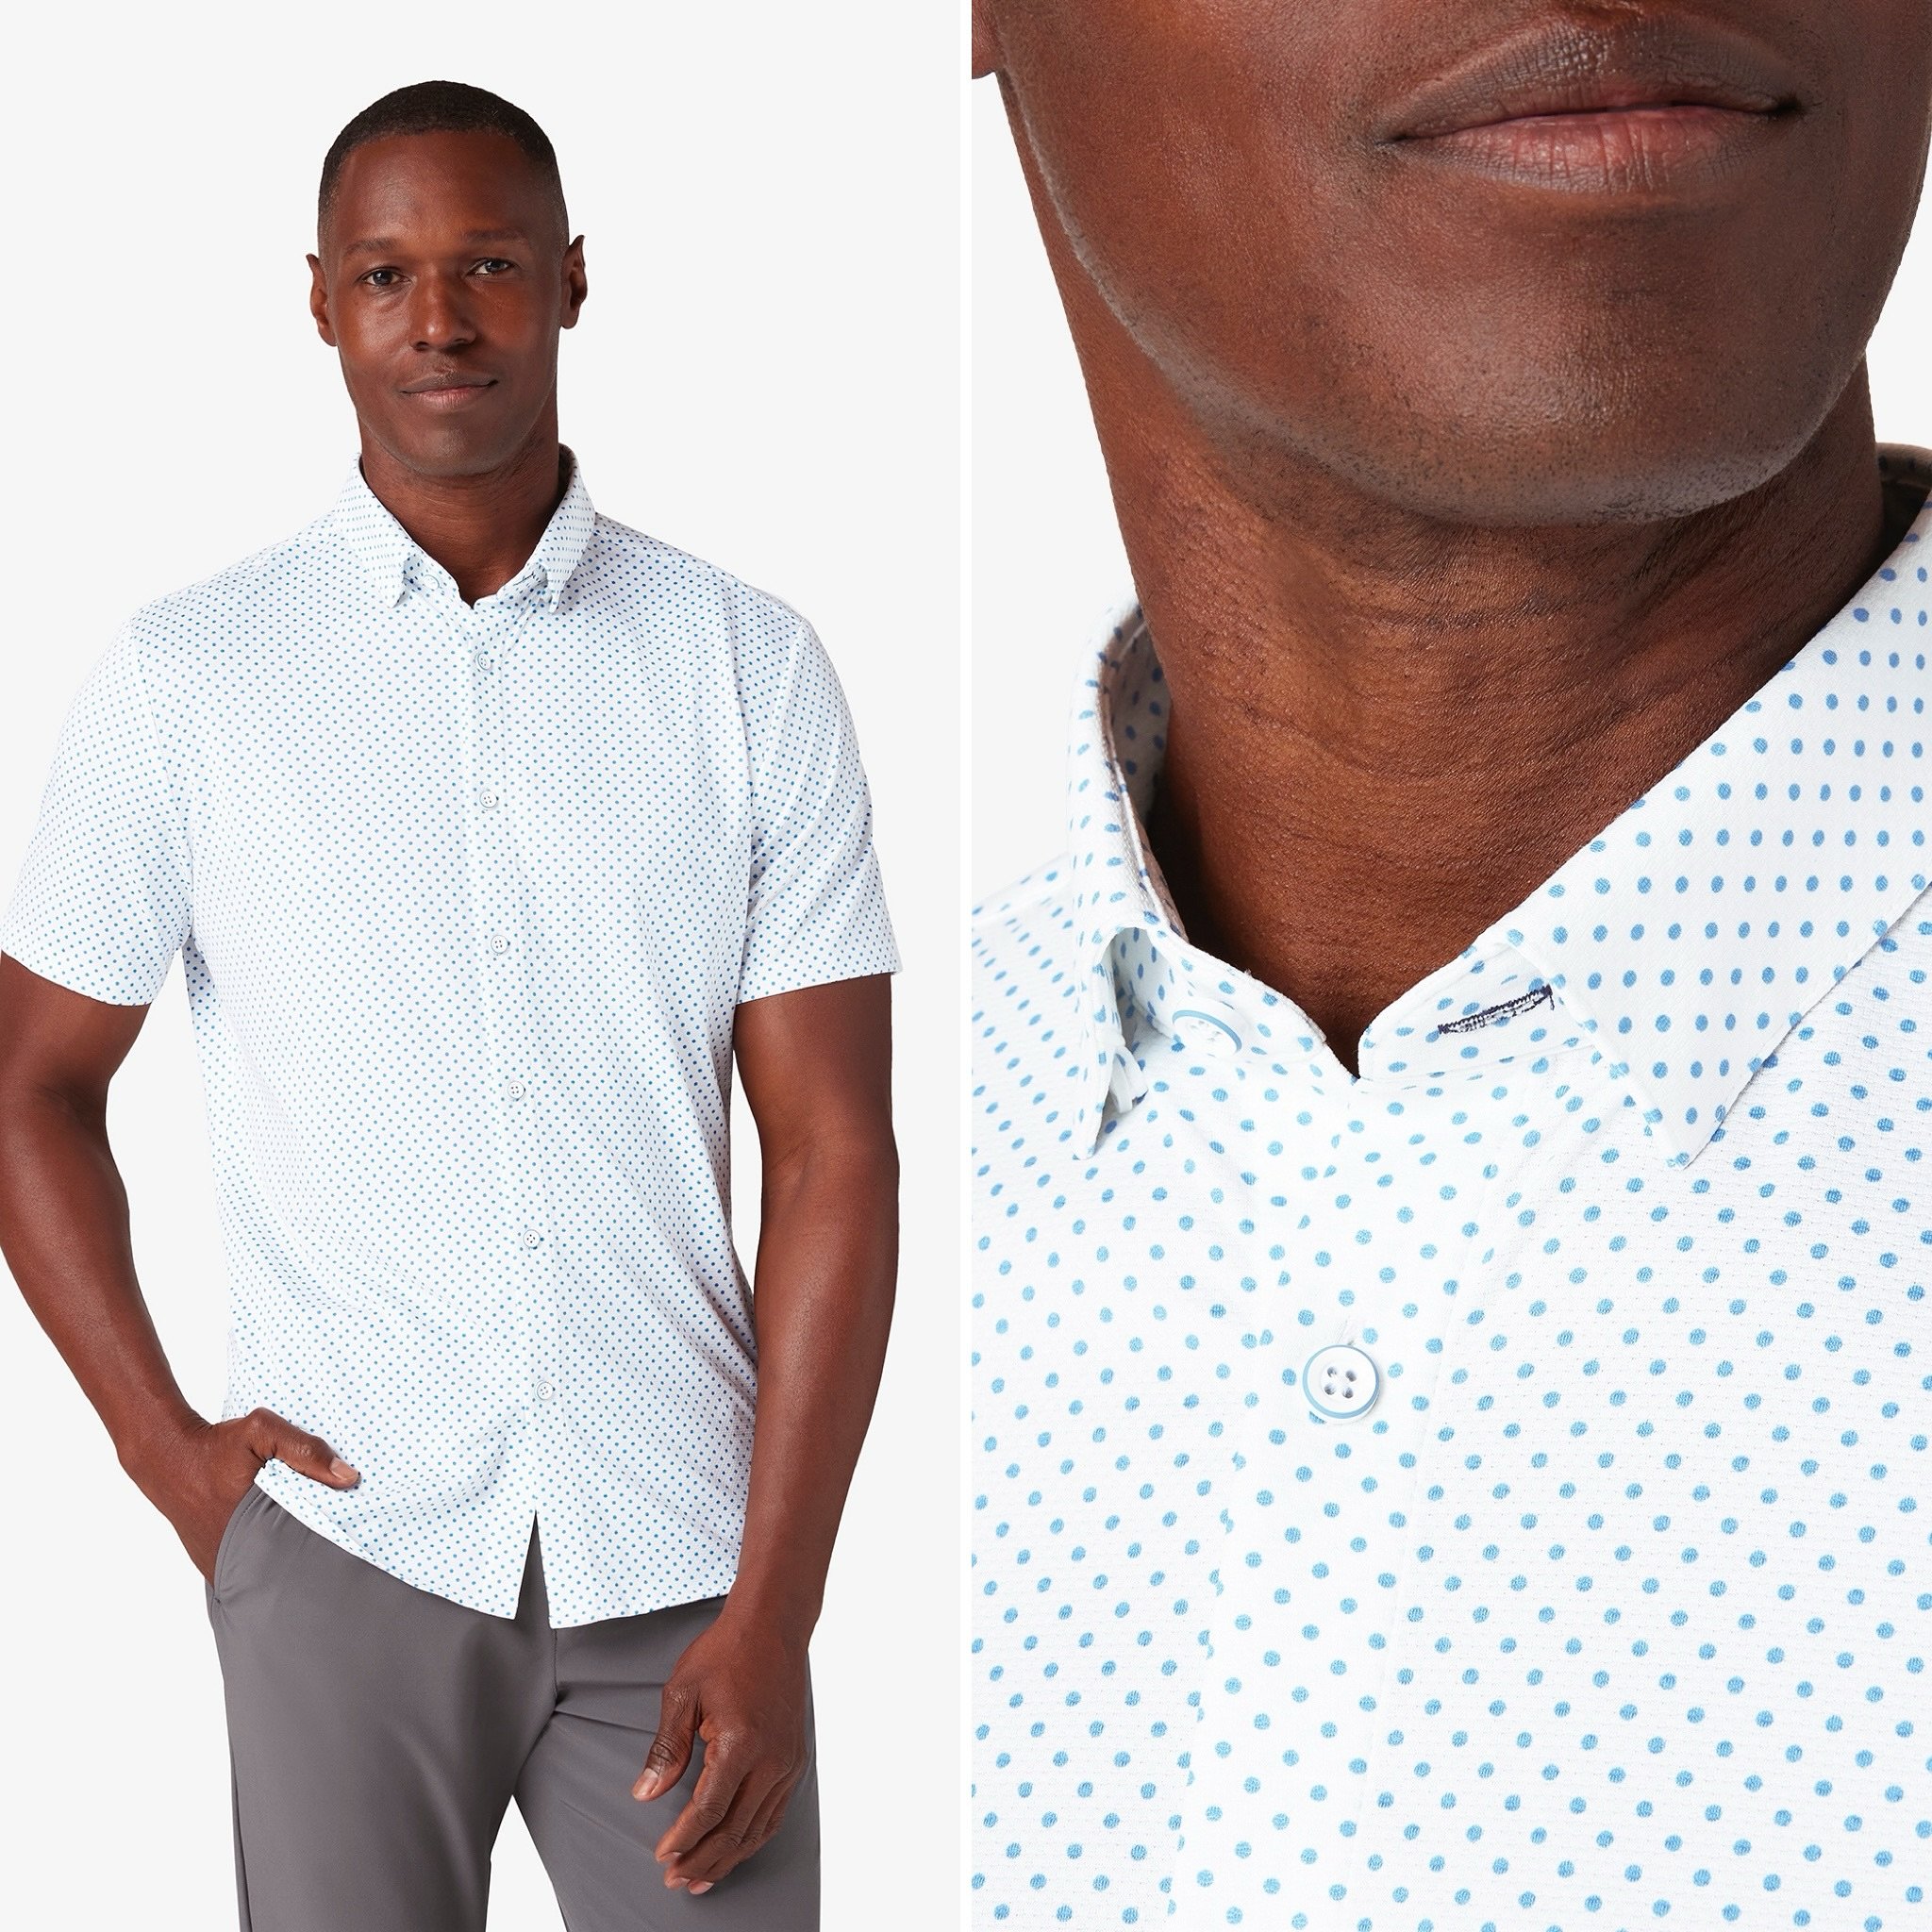 🔵 Can&rsquo;t go wrong with a simple polka dot! 🔵 

New short sleeve shirt in from Mizzen &amp; Main.